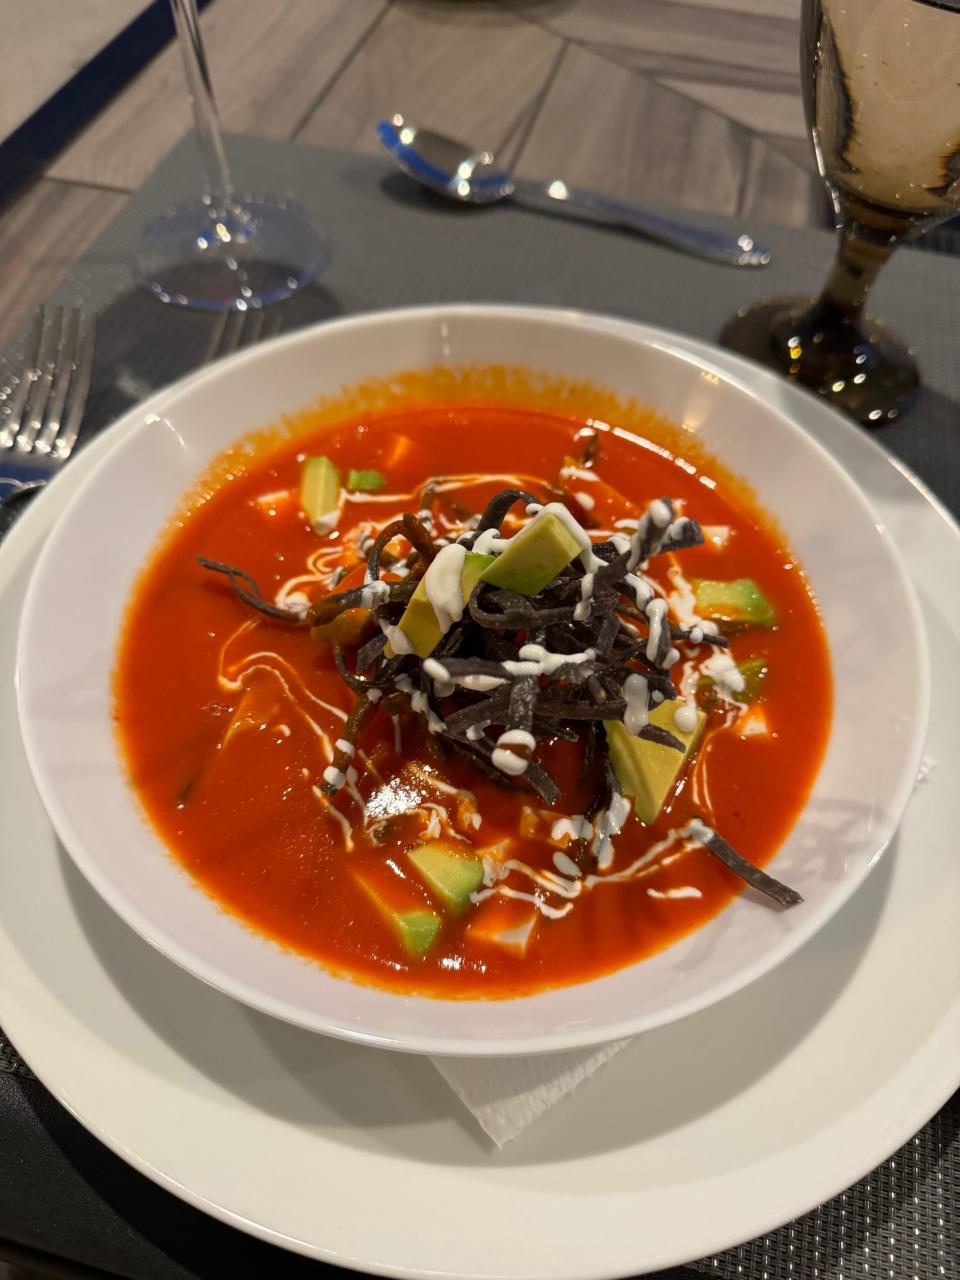 A bowl of vibrant soup garnished with avocado slices, tortilla strips, and drizzled with cream, placed on a neatly set table with cutlery and a wine glass